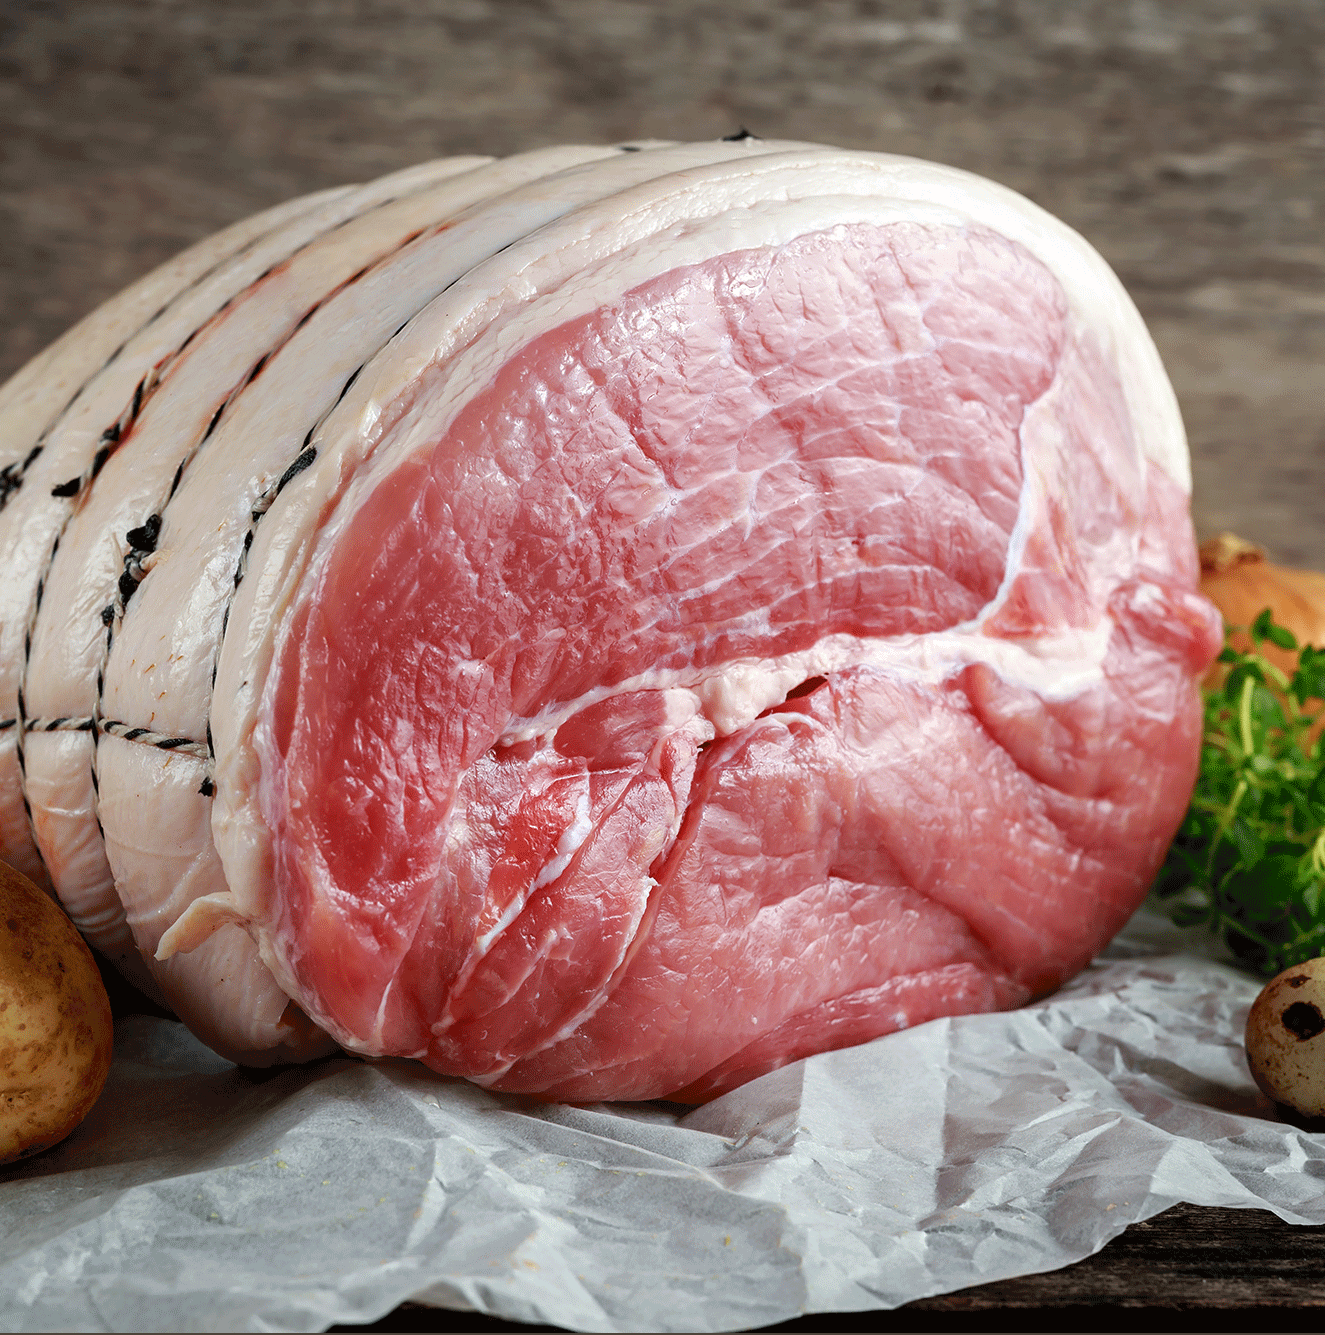 Brakes PM Gammon Quarter Joint 2kg approx (price per kg)